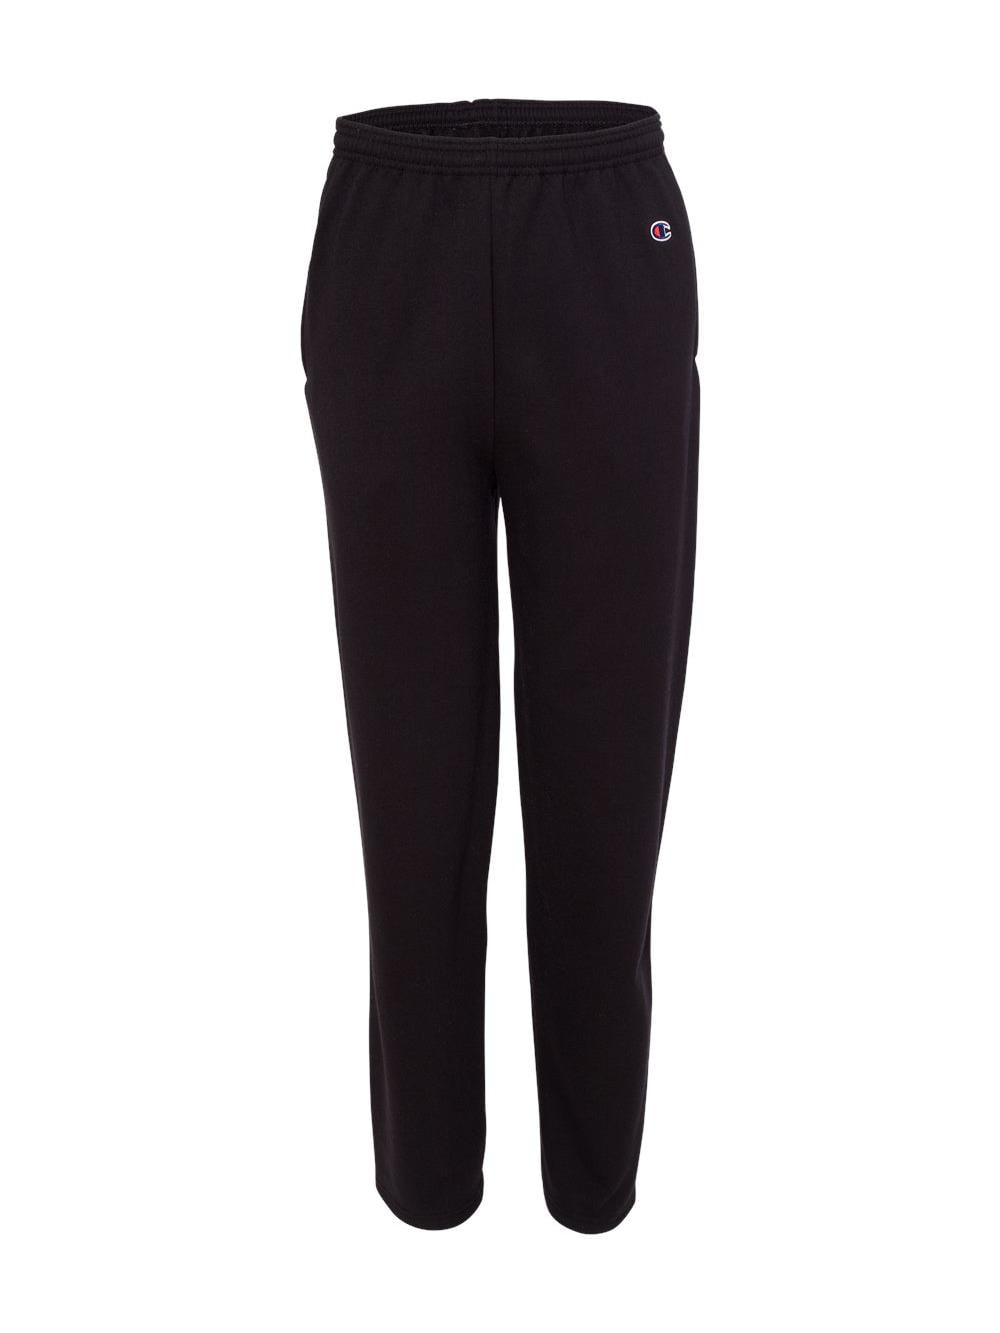 Champion Men's Double Dry Eco Open Bottom Sweatpants with Pockets